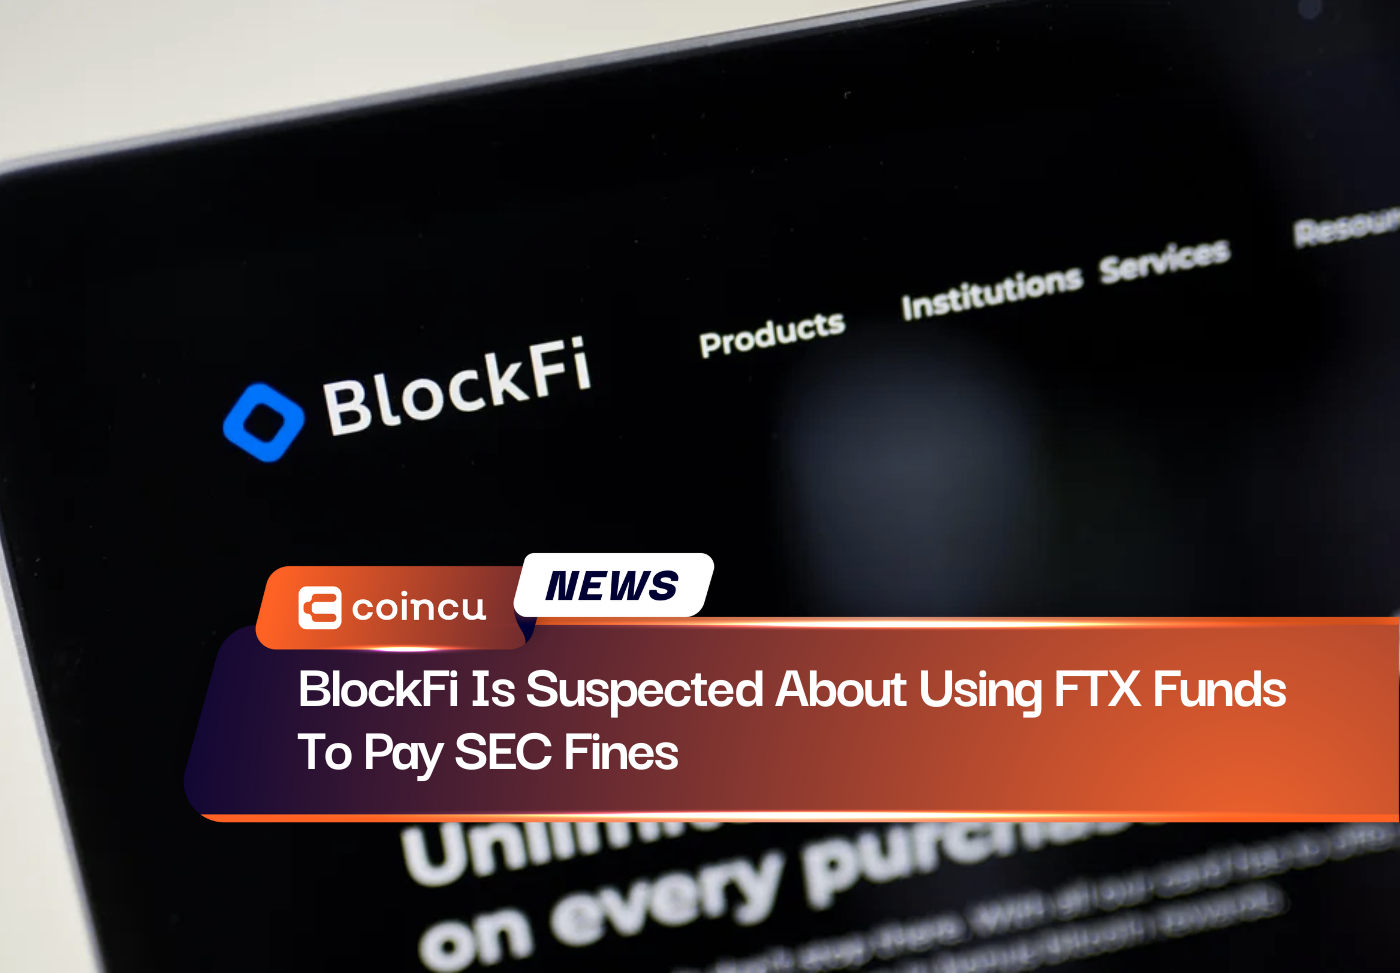 BlockFi Is Suspected About Using FTX Funds To Pay SEC Fines